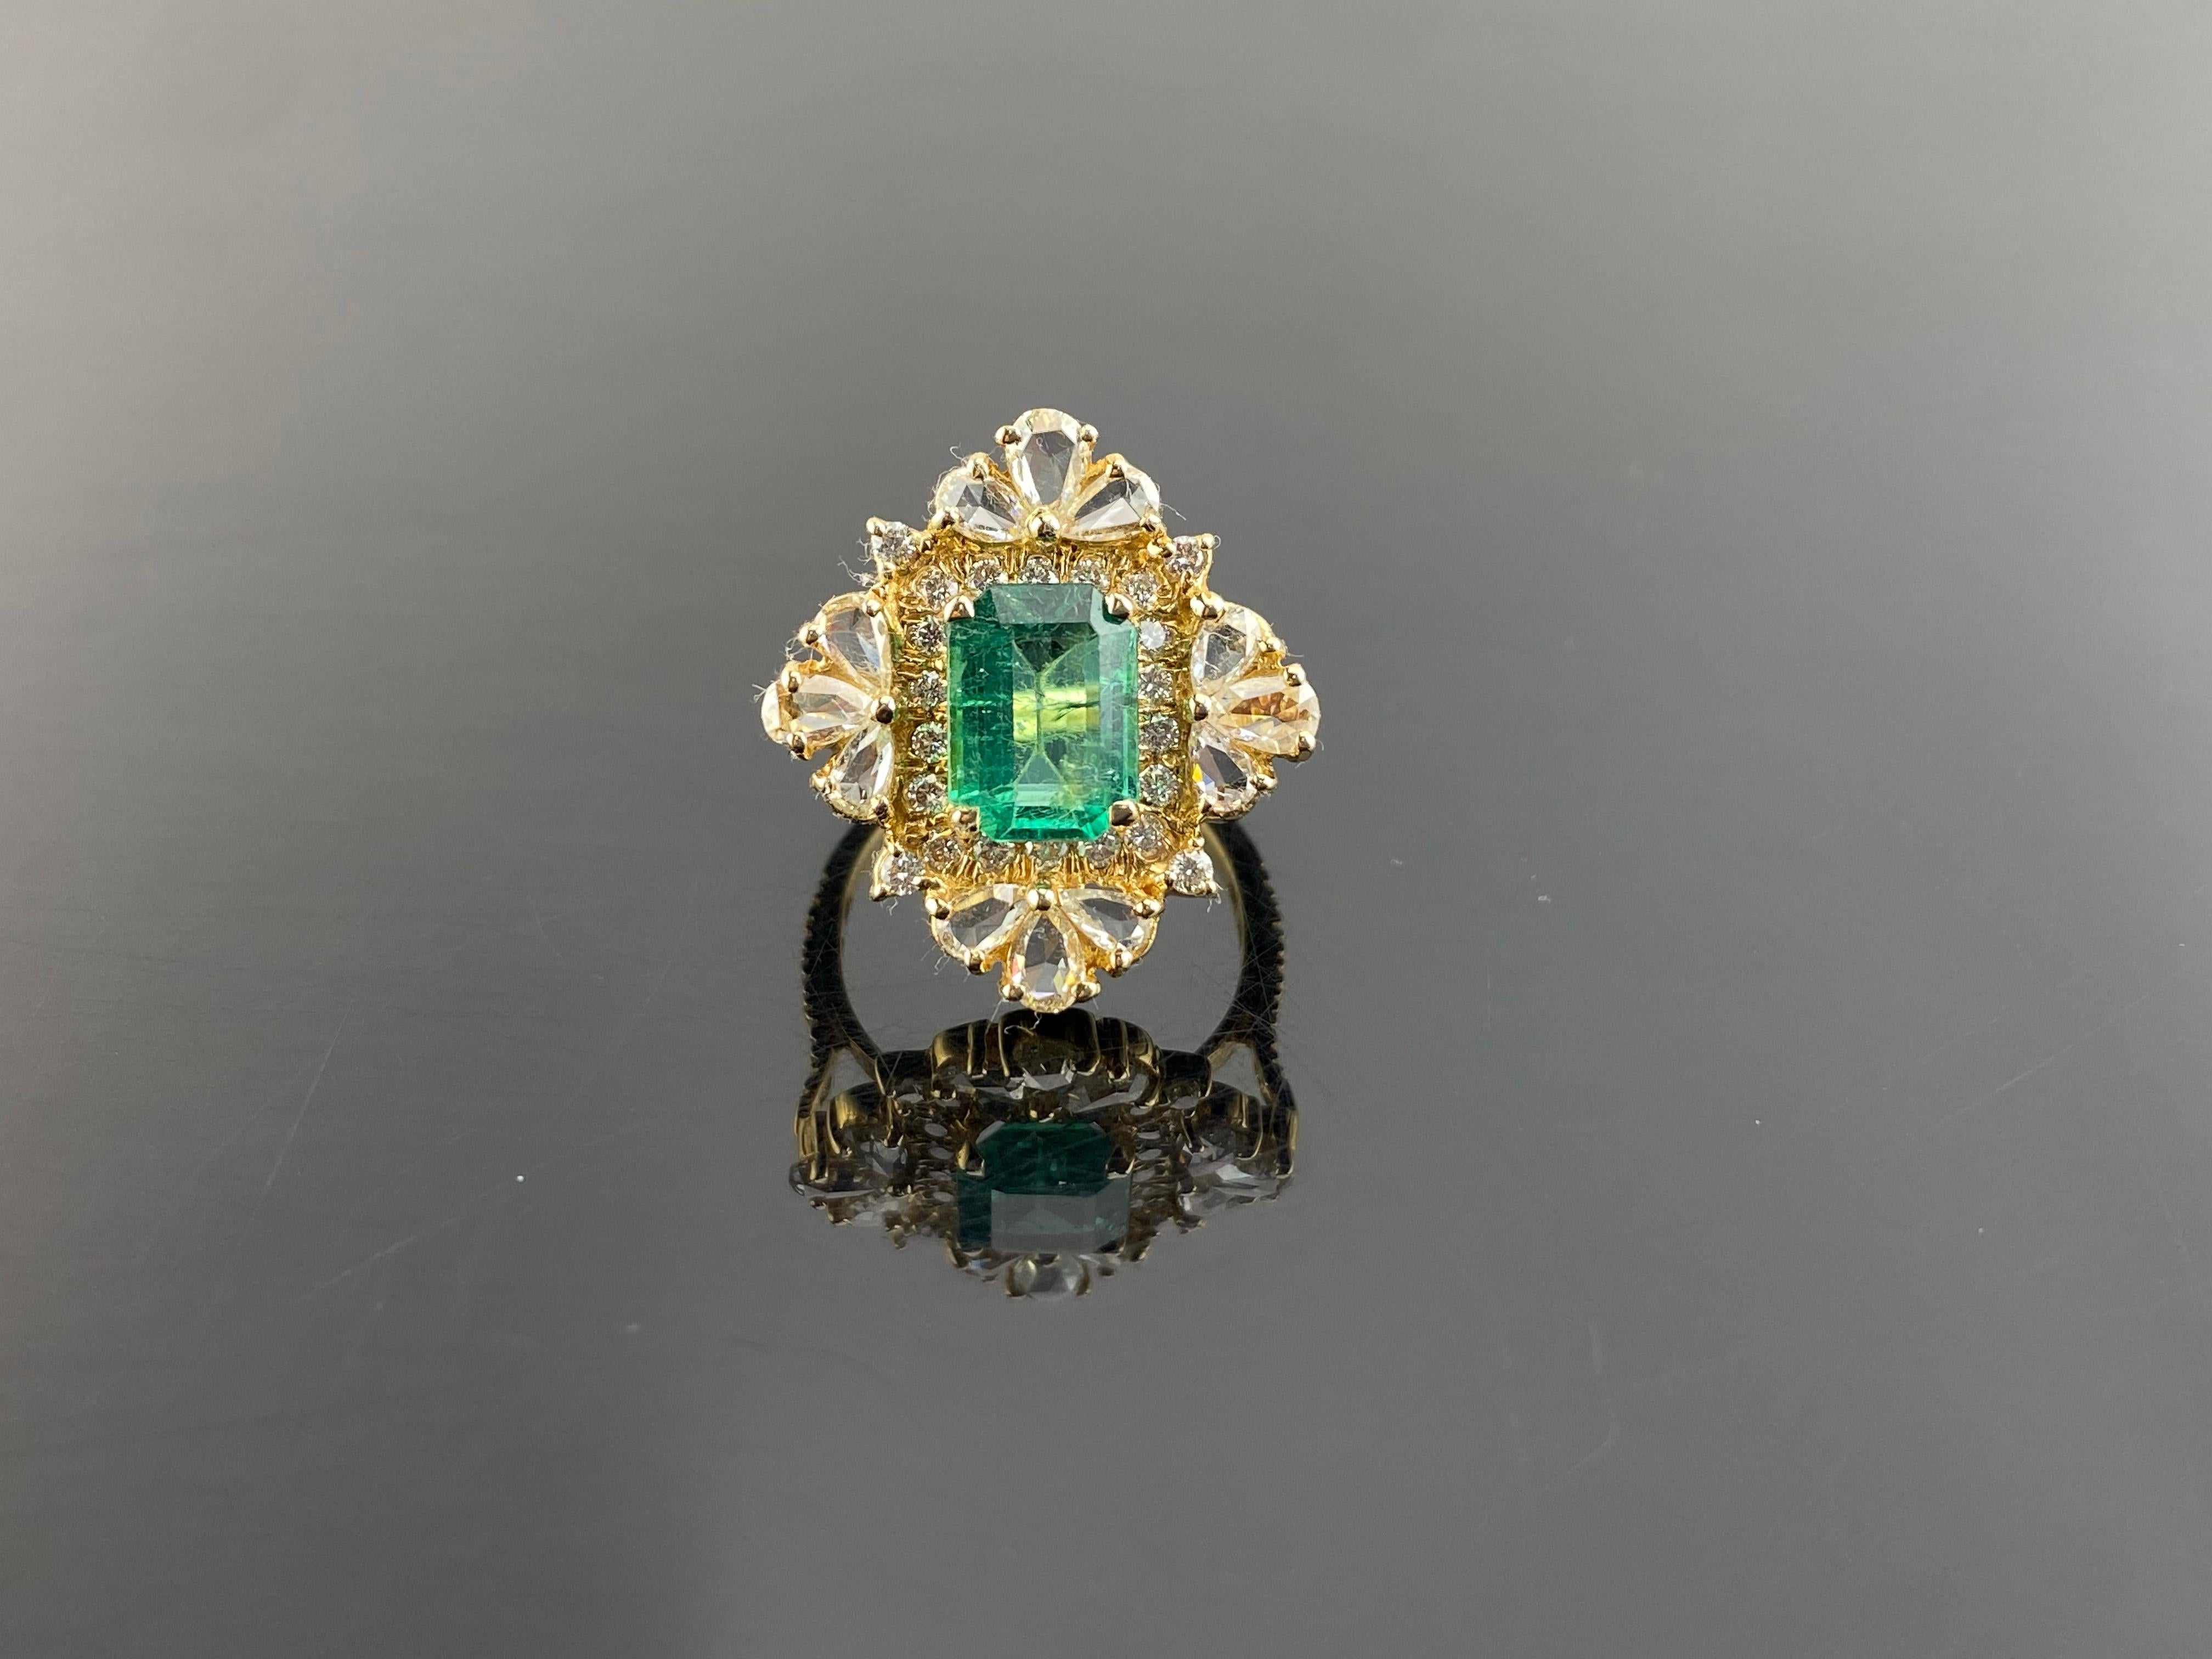 A beautiful, antique-looking 1.71 carat Zambian Emerald and 1.45 carat rose cut and full cut White Diamond cocktail ring, all set in solid 18K Yellow Gold. The ring is currently sized at US 6.5, can be resized. The center stone Emerald is